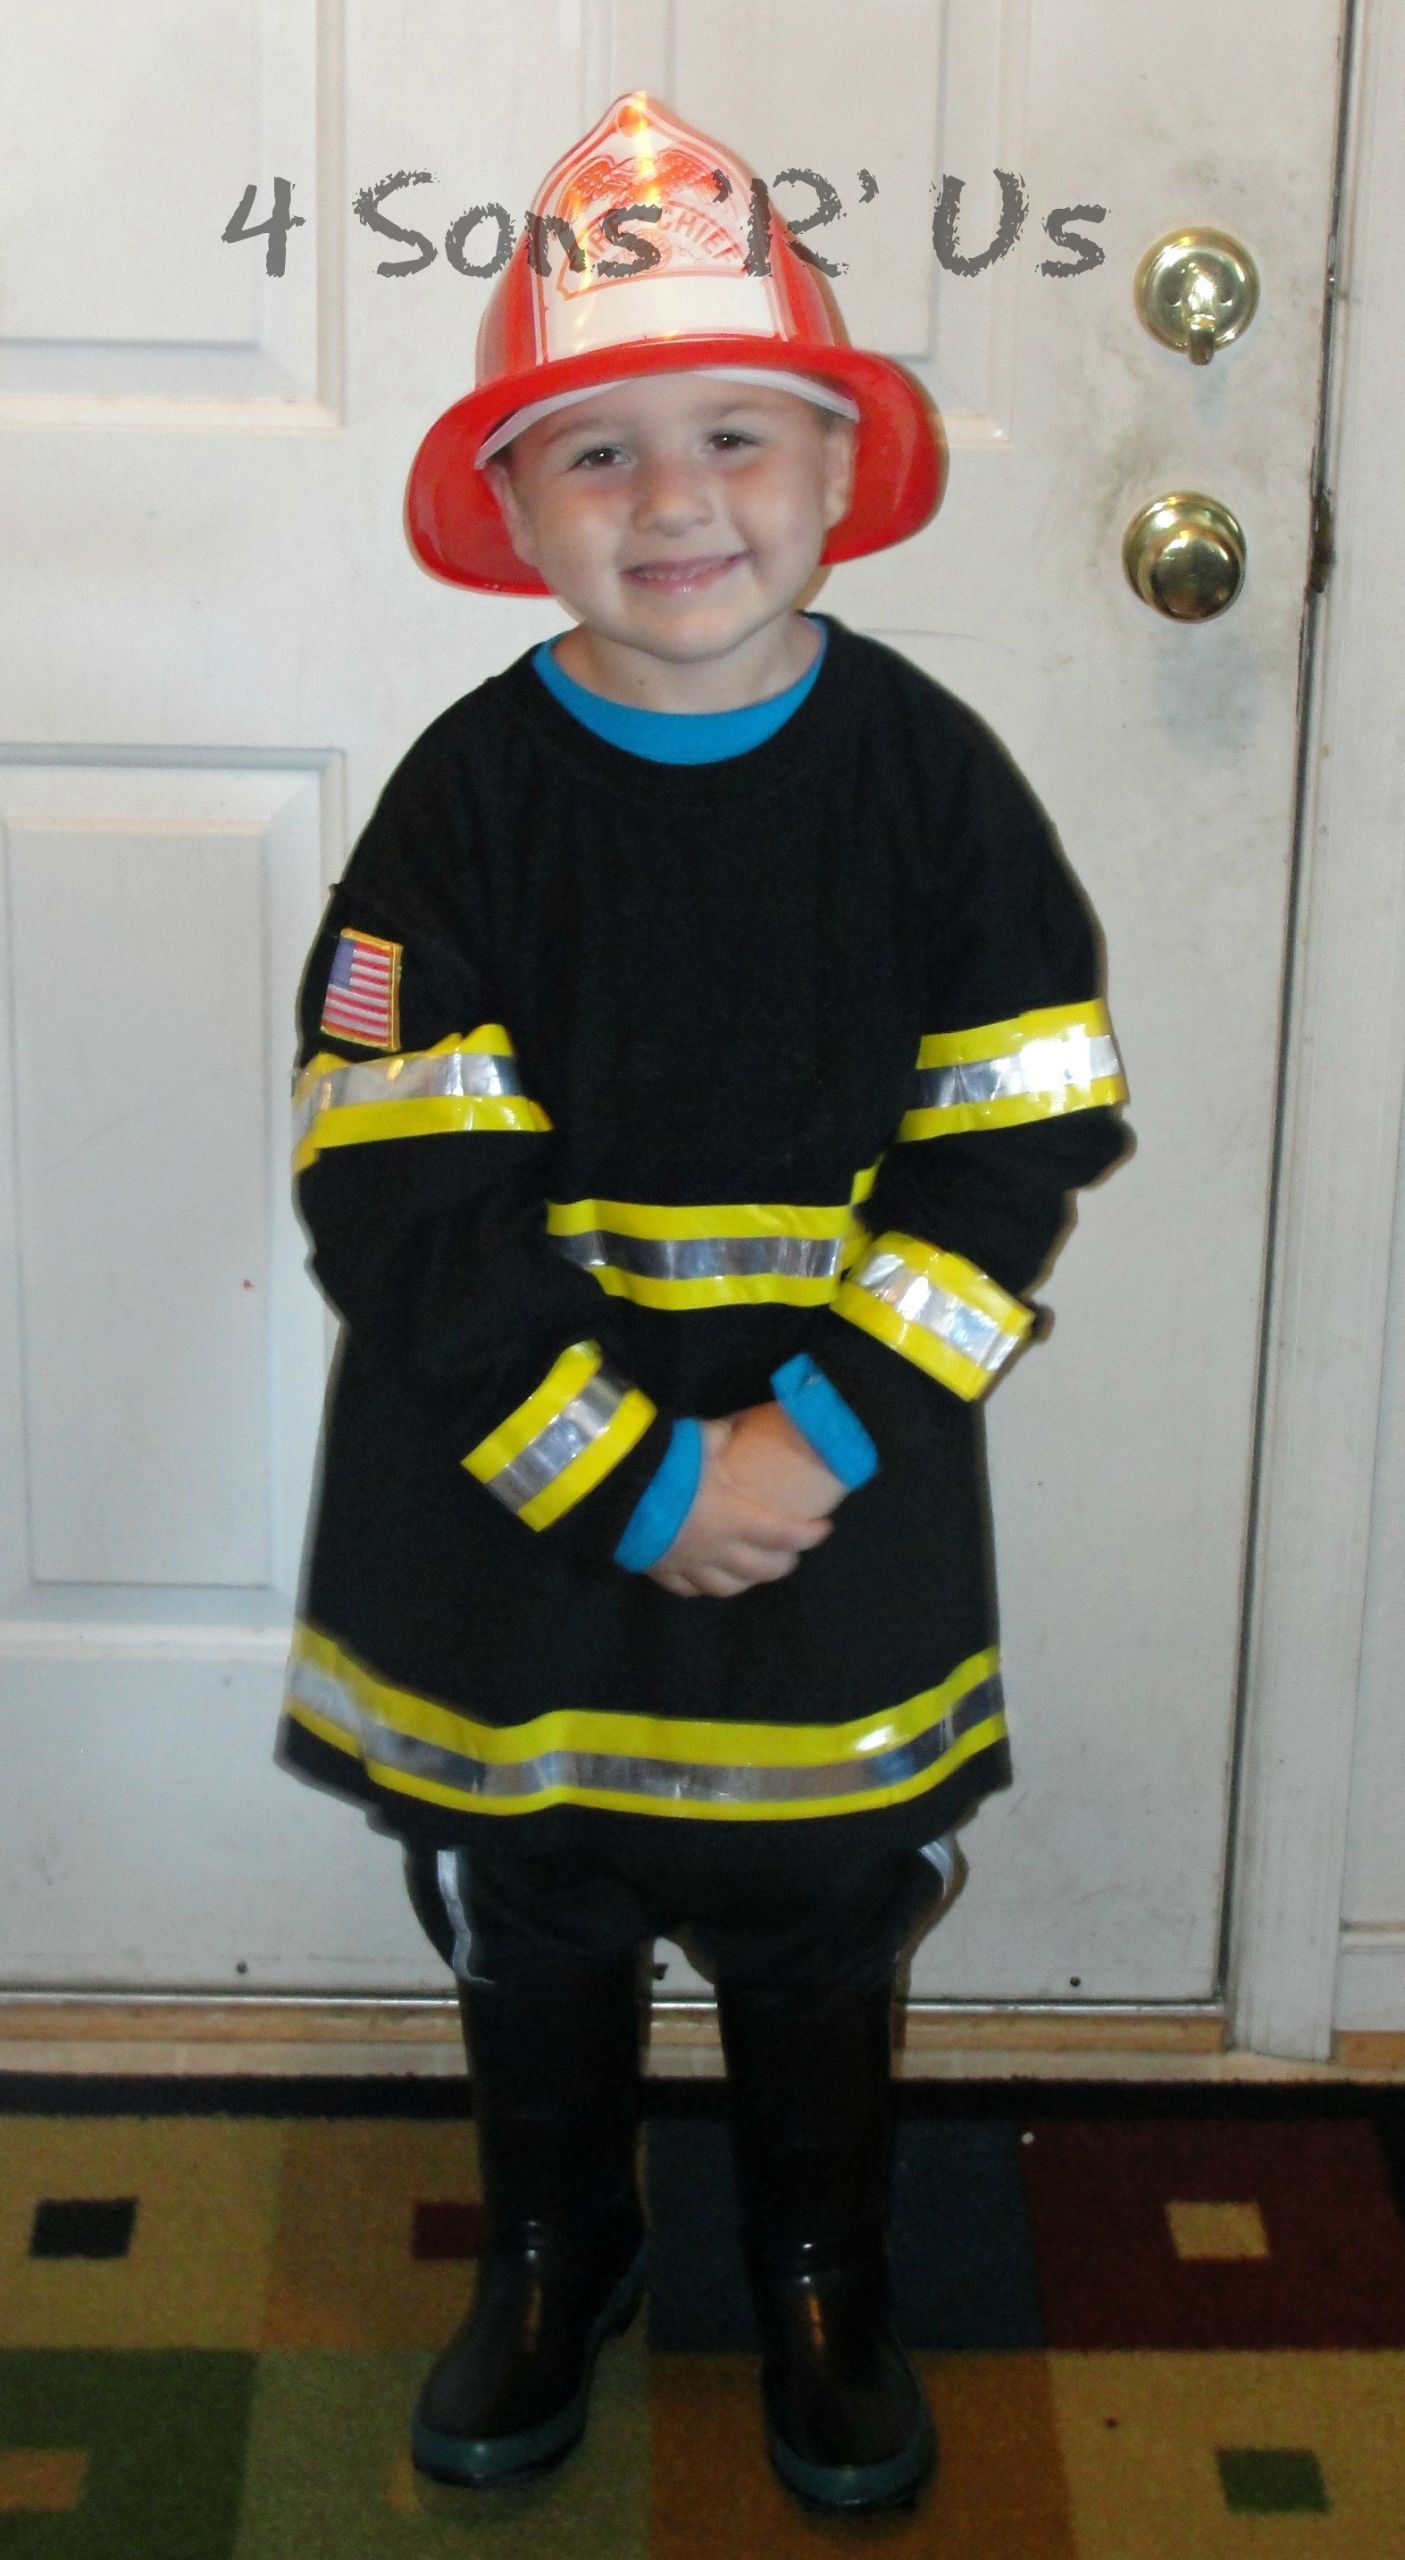 Firefighter Costume DIY
 4 Sons R Us